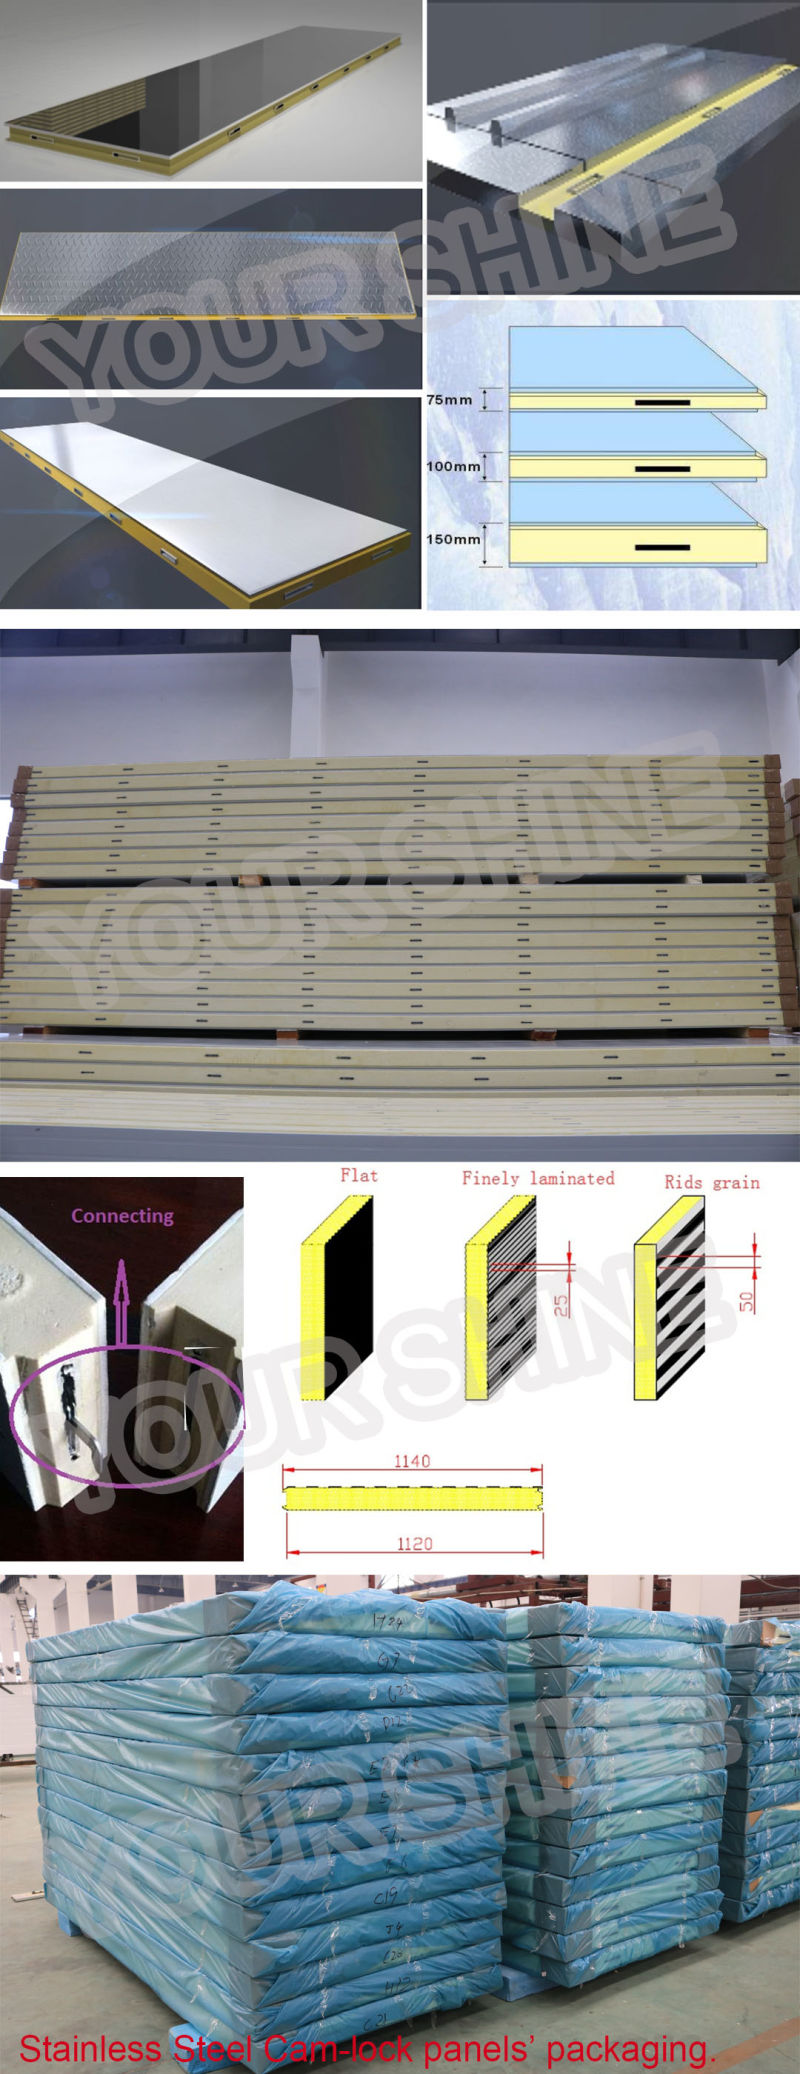 From Polyurethane Foam Sandwich Panels for Cold Storage